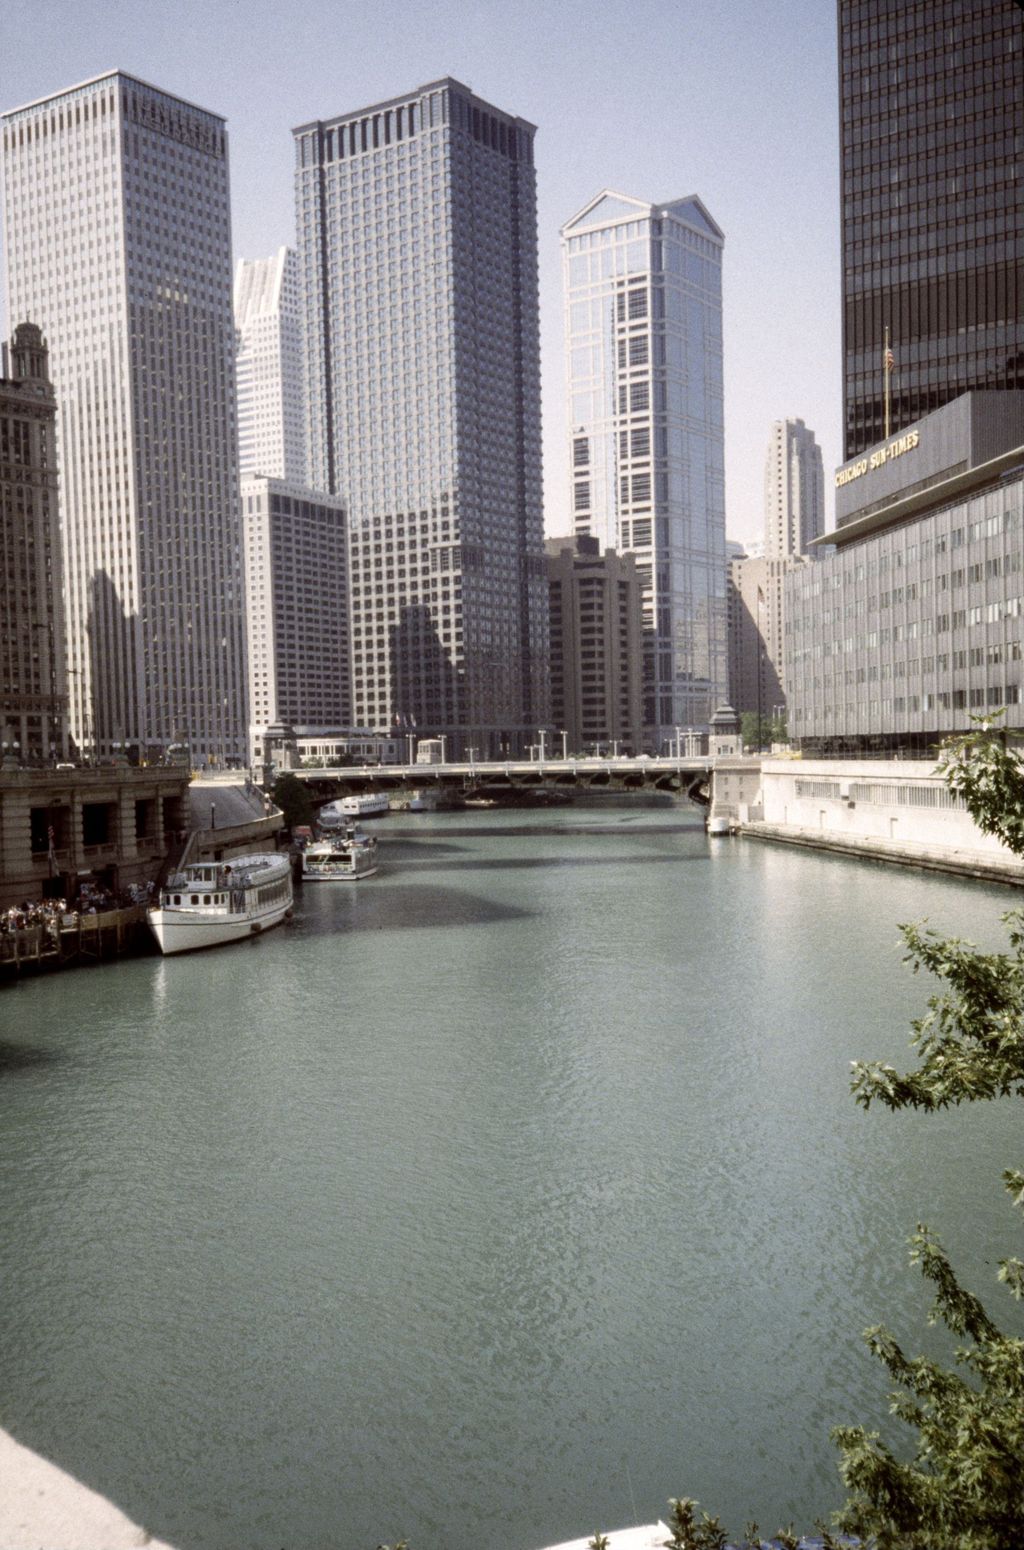 Chicago River and high-rise towers along Wacker Drive